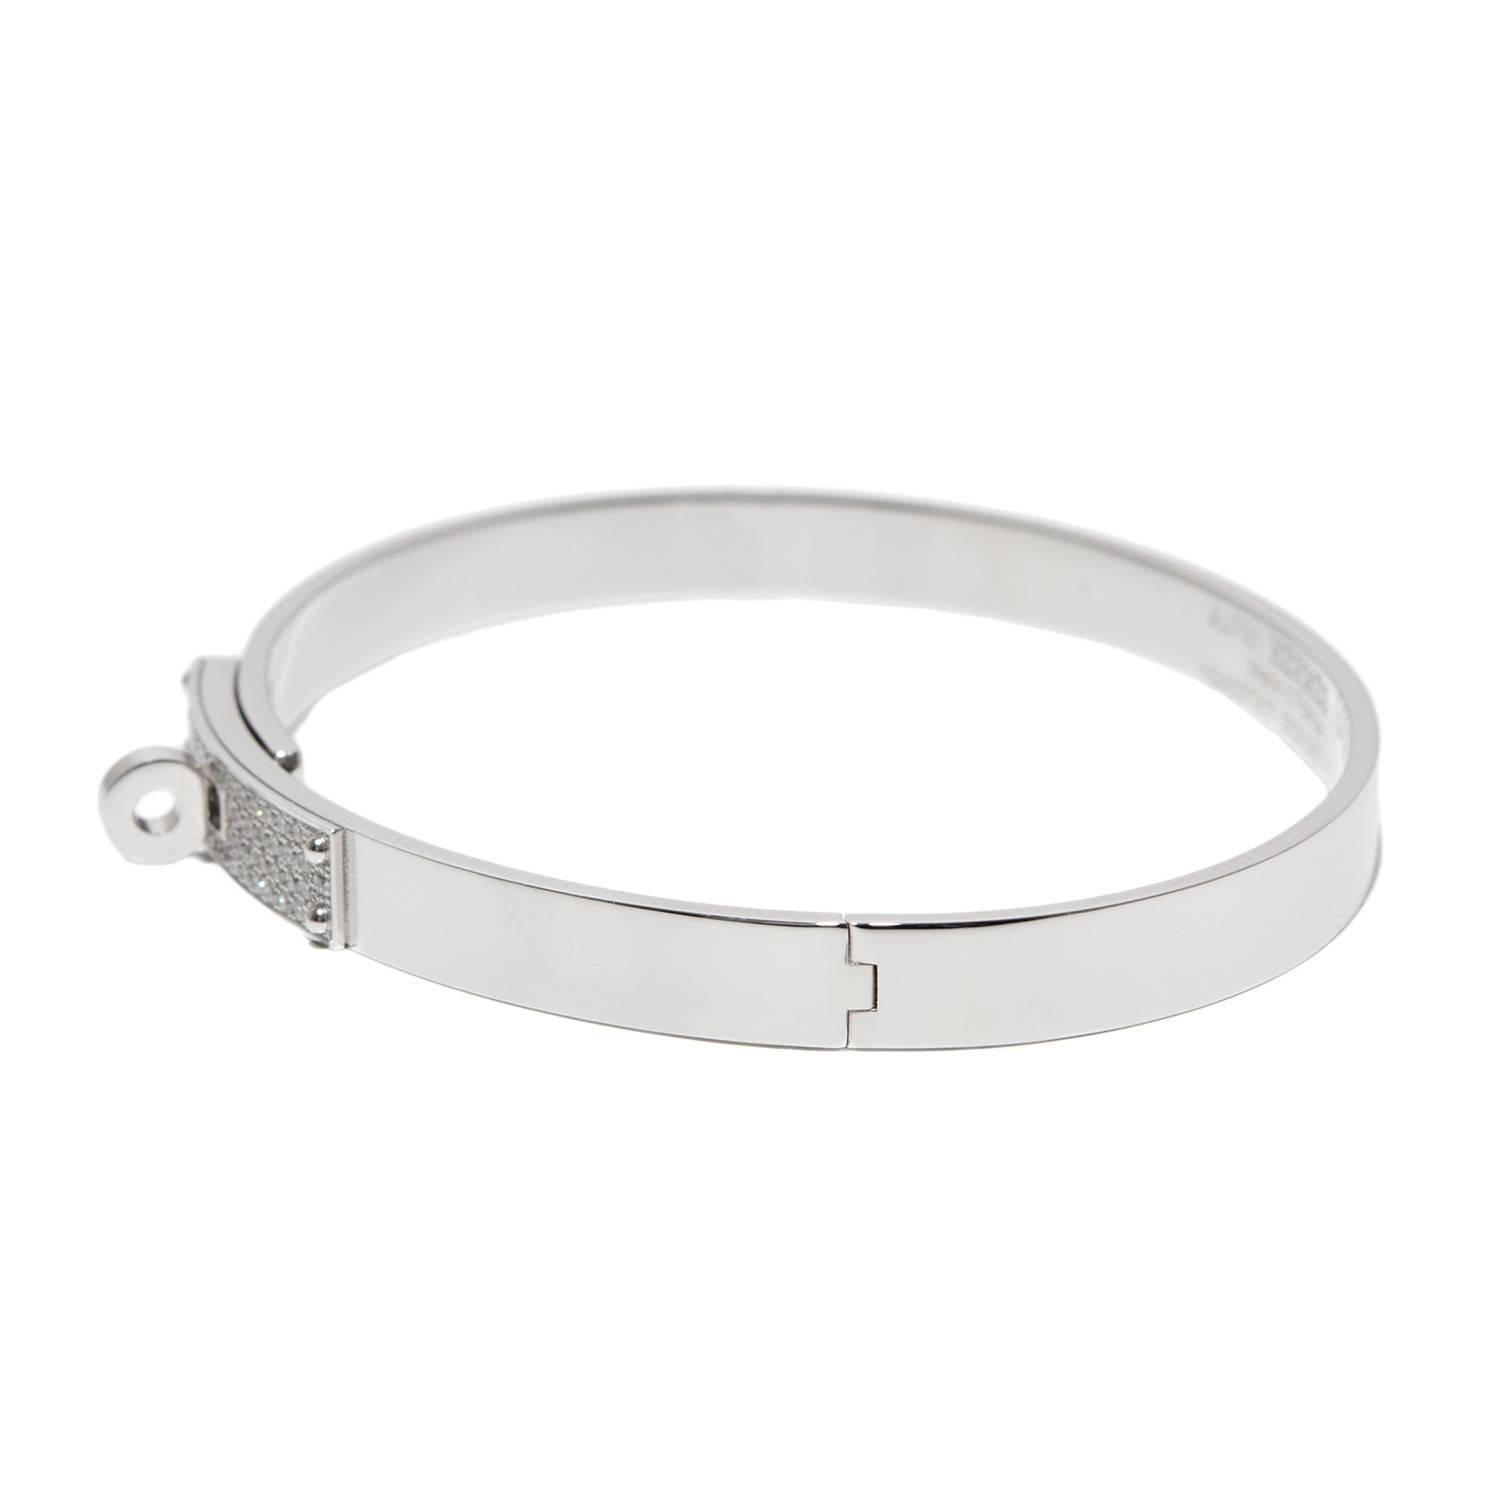 Hermes Kelly H bracelet in 18 karat white gold in size small. 

The bracelet features a toggle closure encrusted with 57 diamonds (.33ct).

Origin: France

Condition: Pristine; never worn 

Accompanied by: Hermes box, Jewelry box, cushion, Diamonds